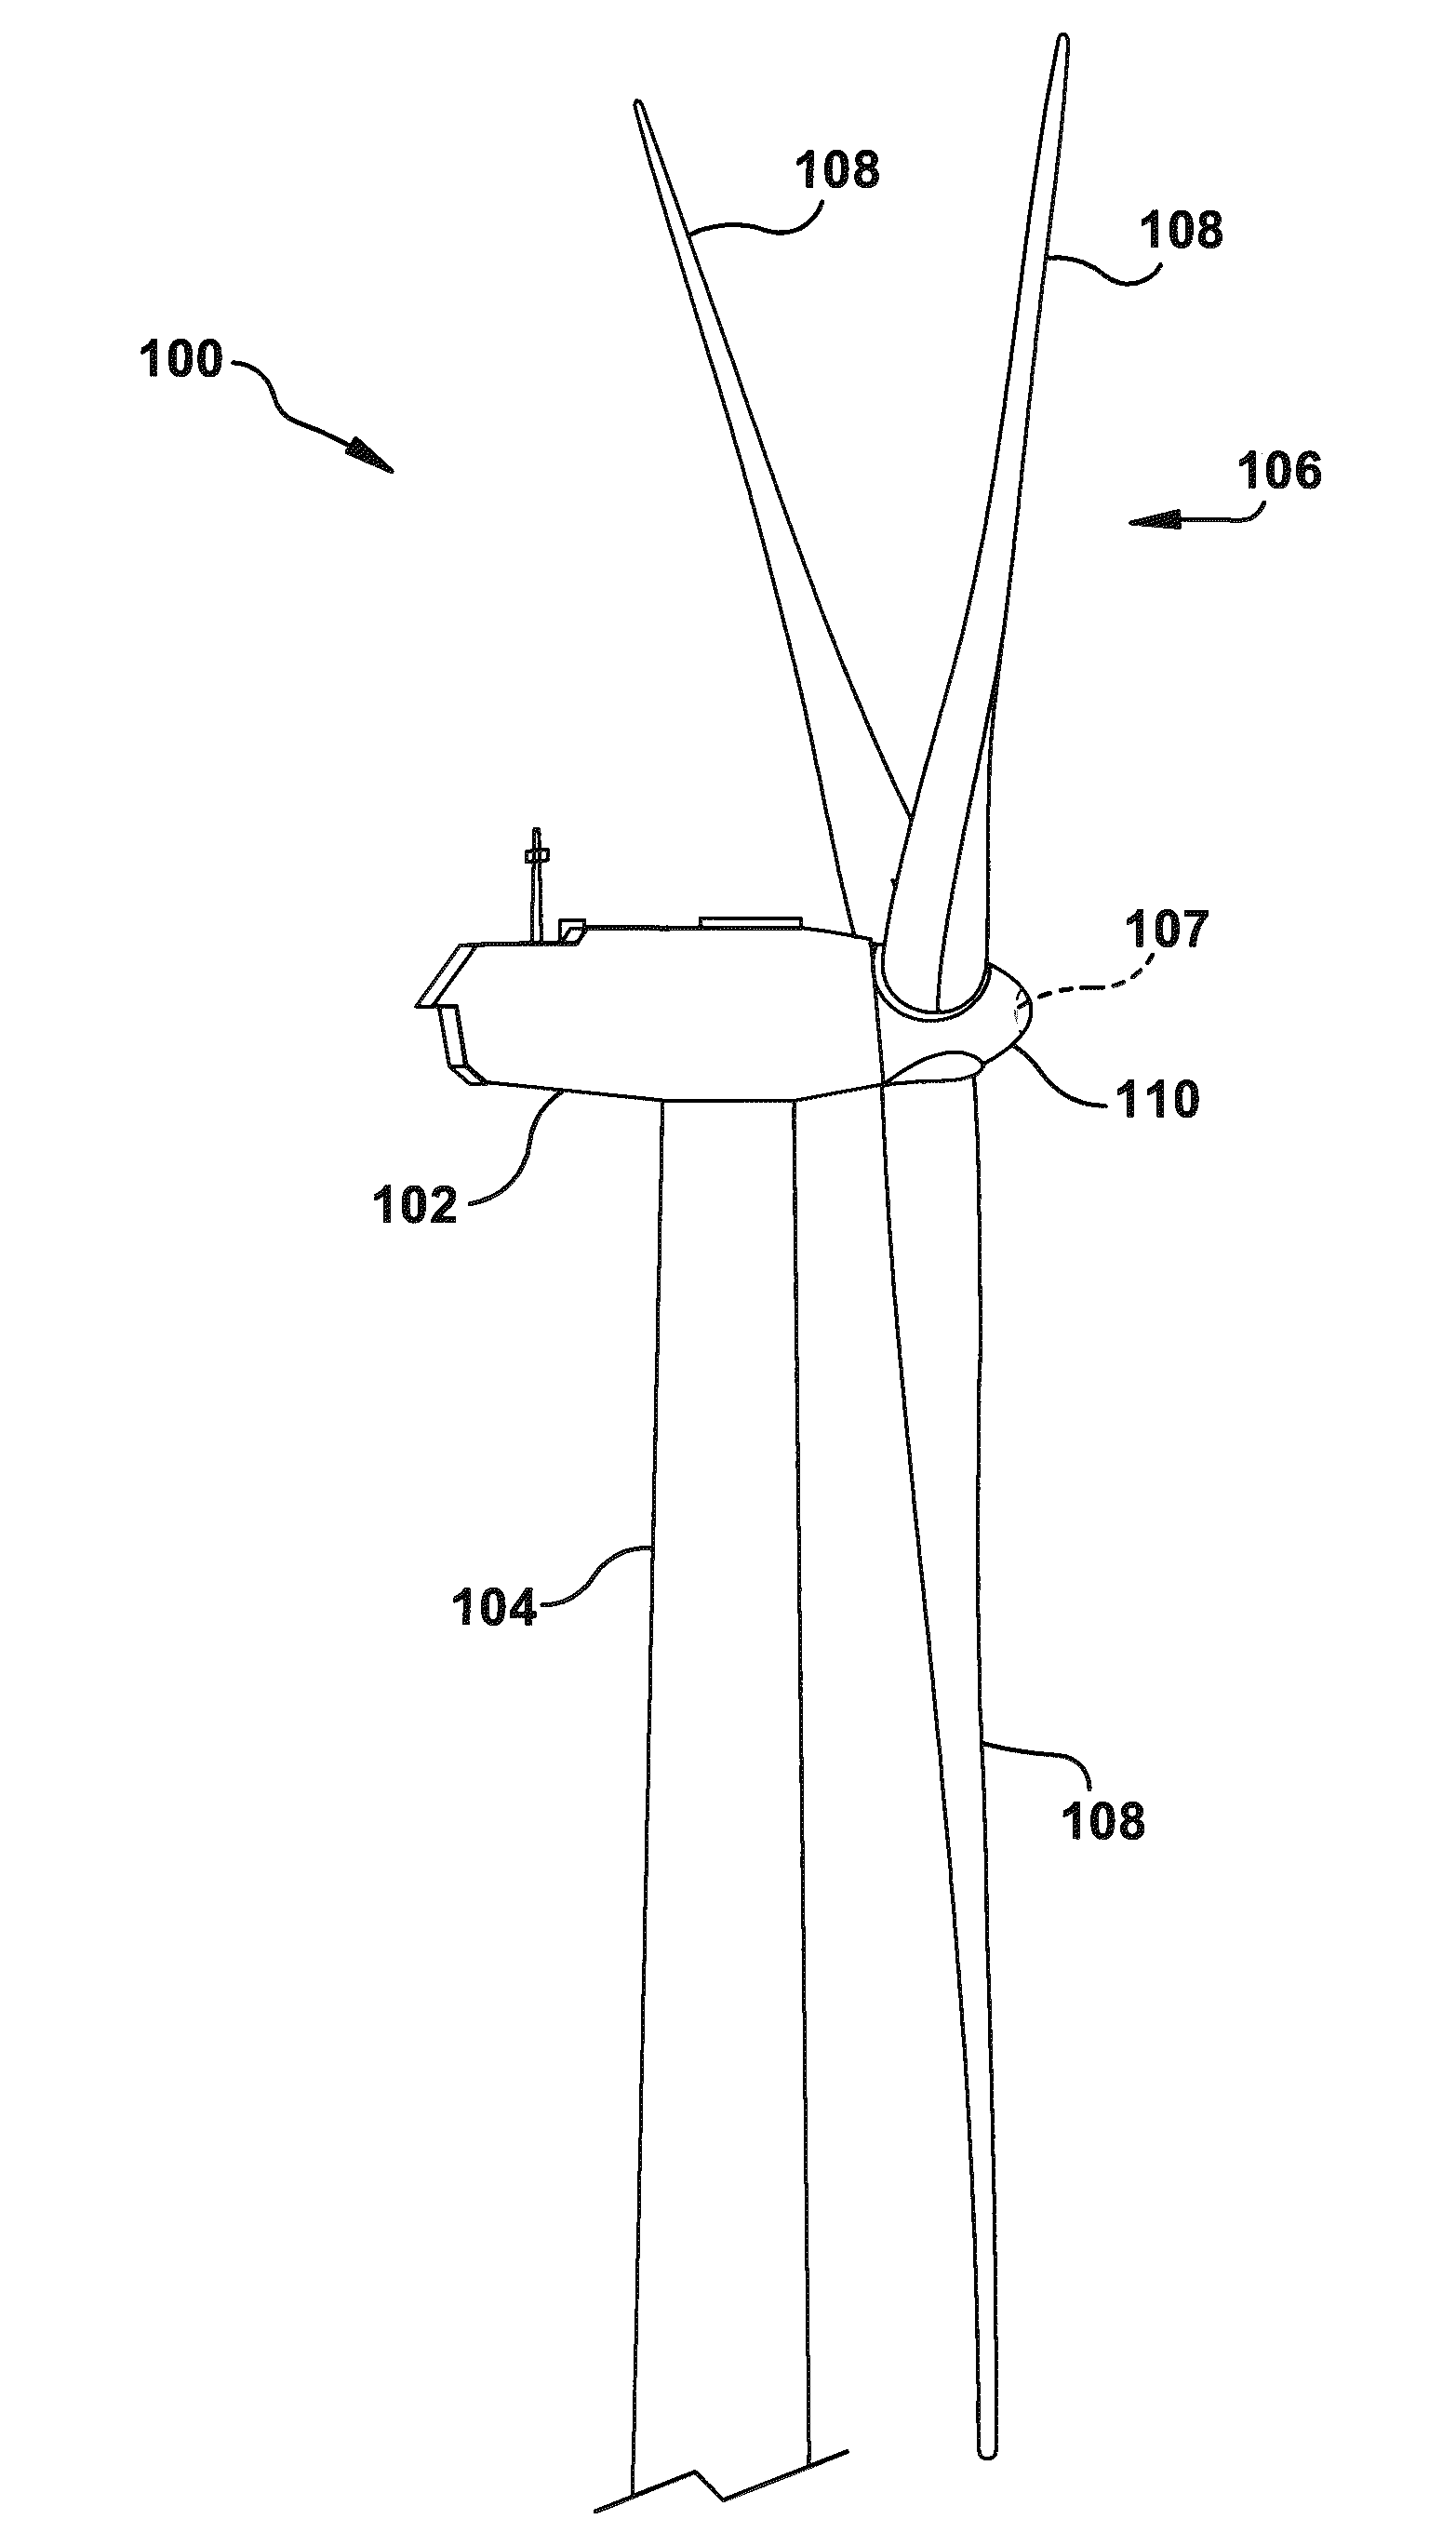 Spinner-less hub access and lifting system for a wind turbine